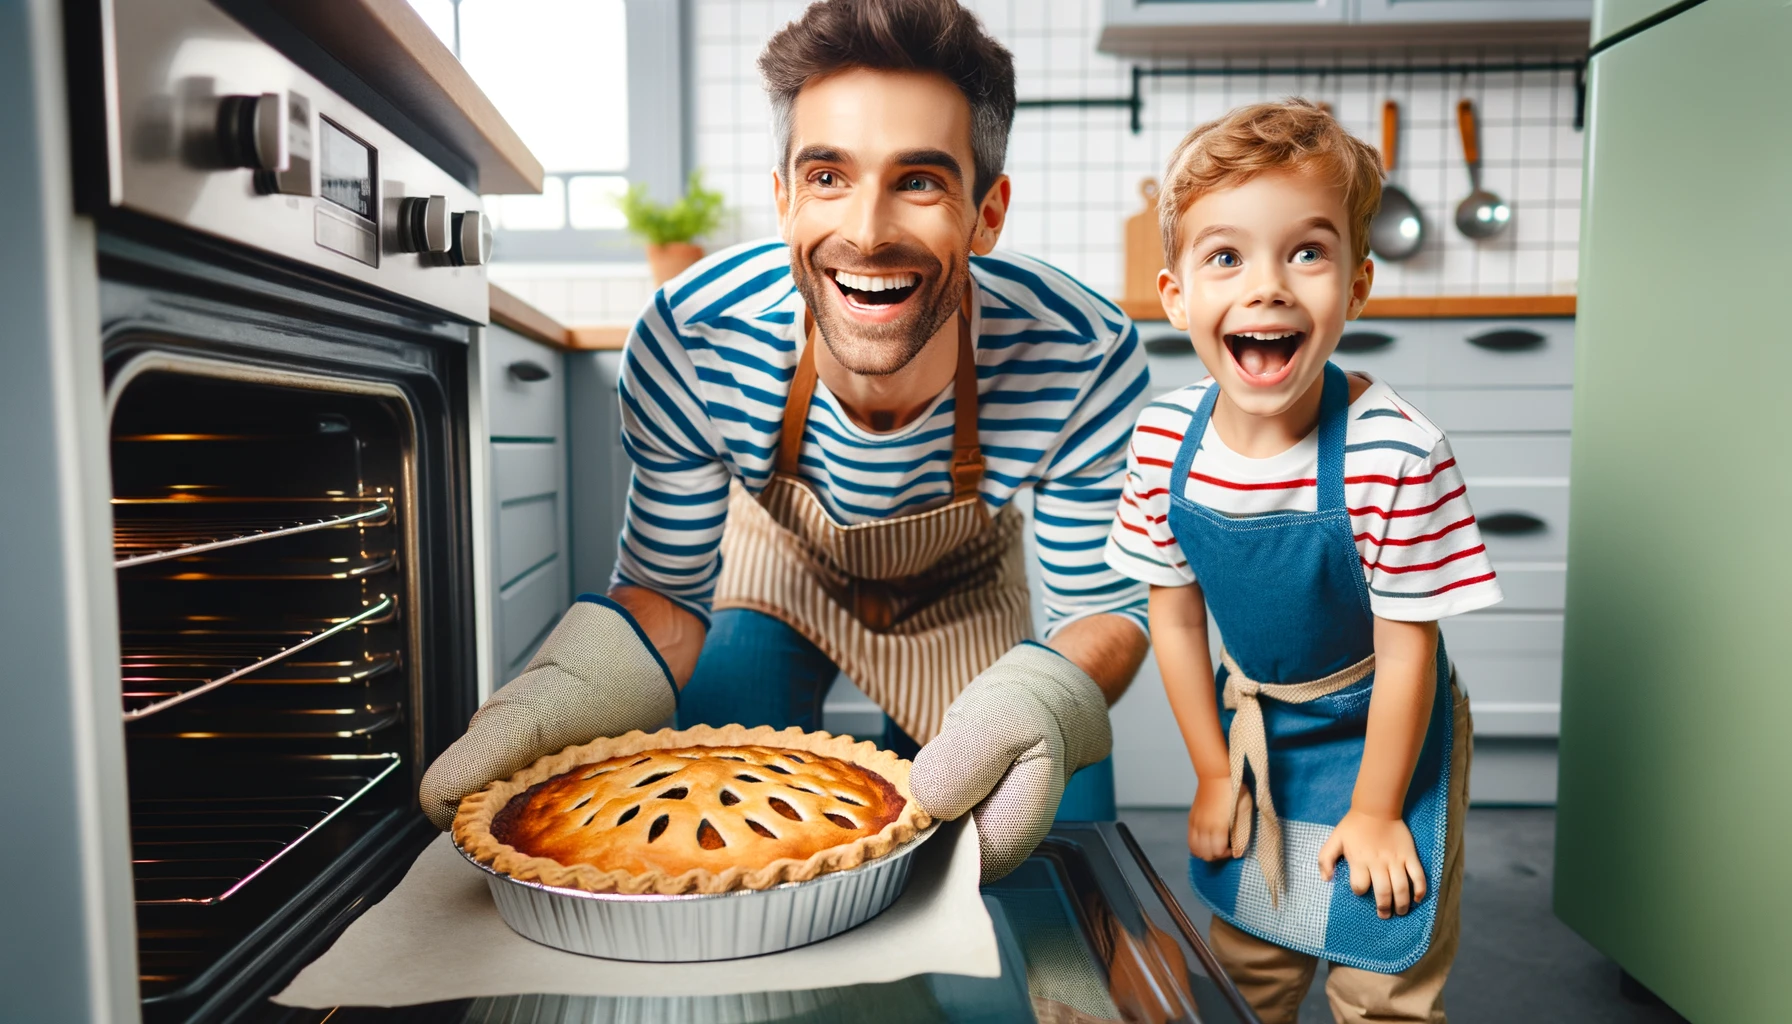 Repair or replace your oven